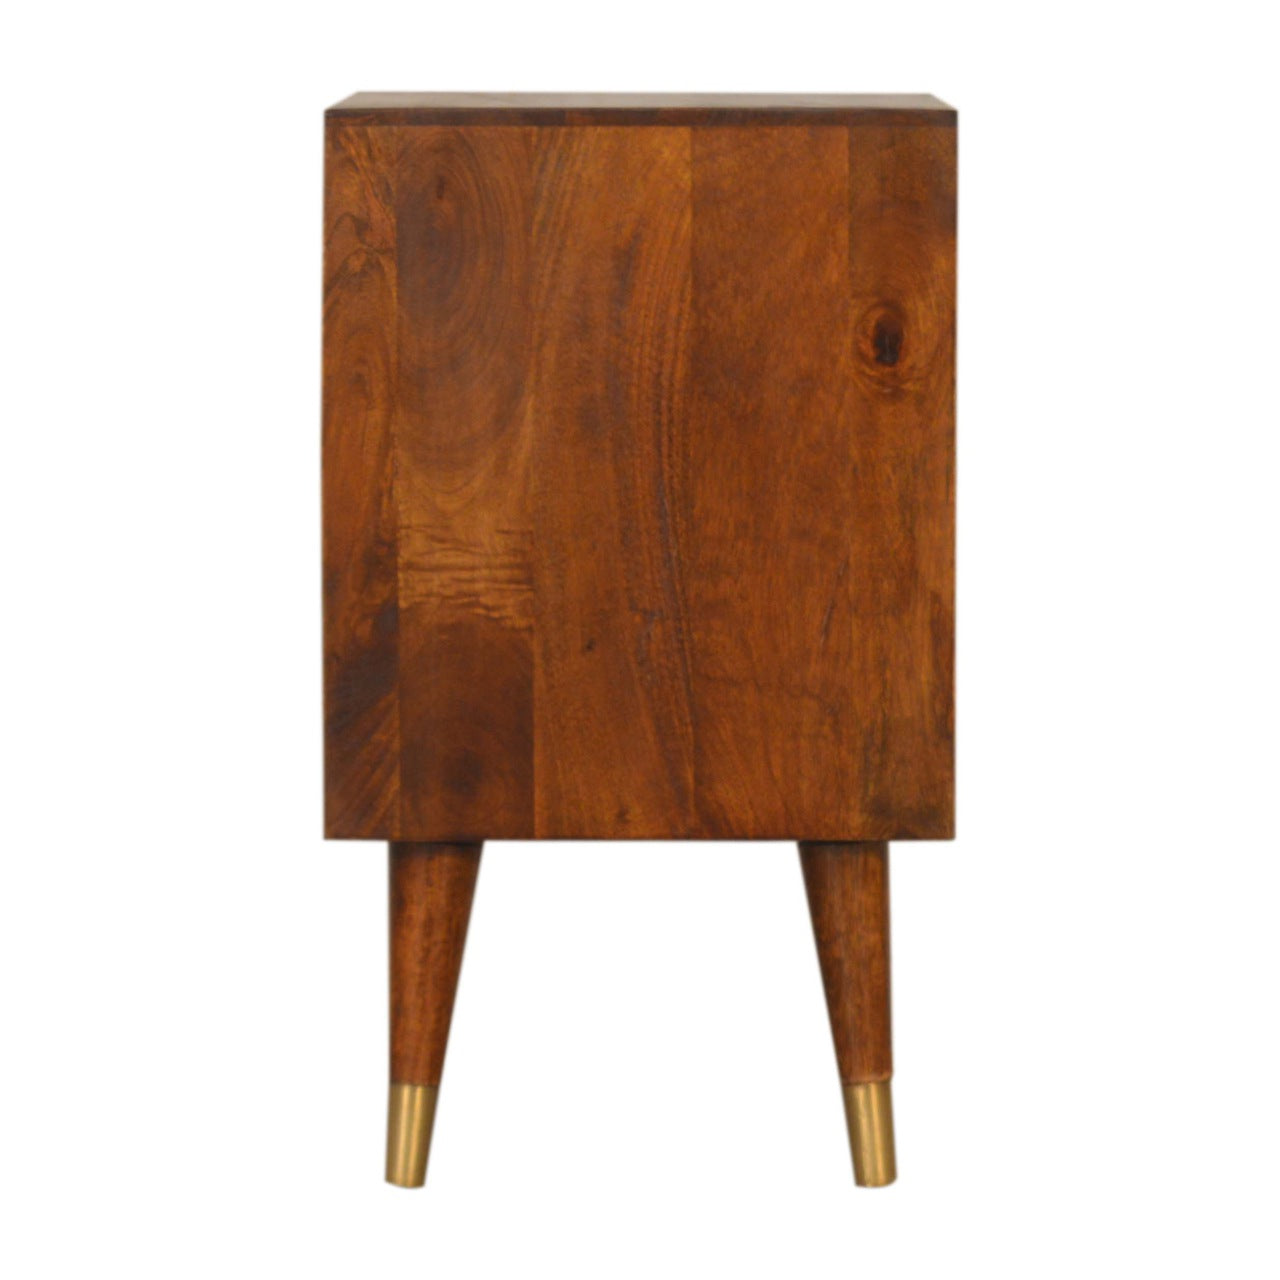 Malani Bedside Table, Solid Chestnut & Gold Brass Inlay - Broxle